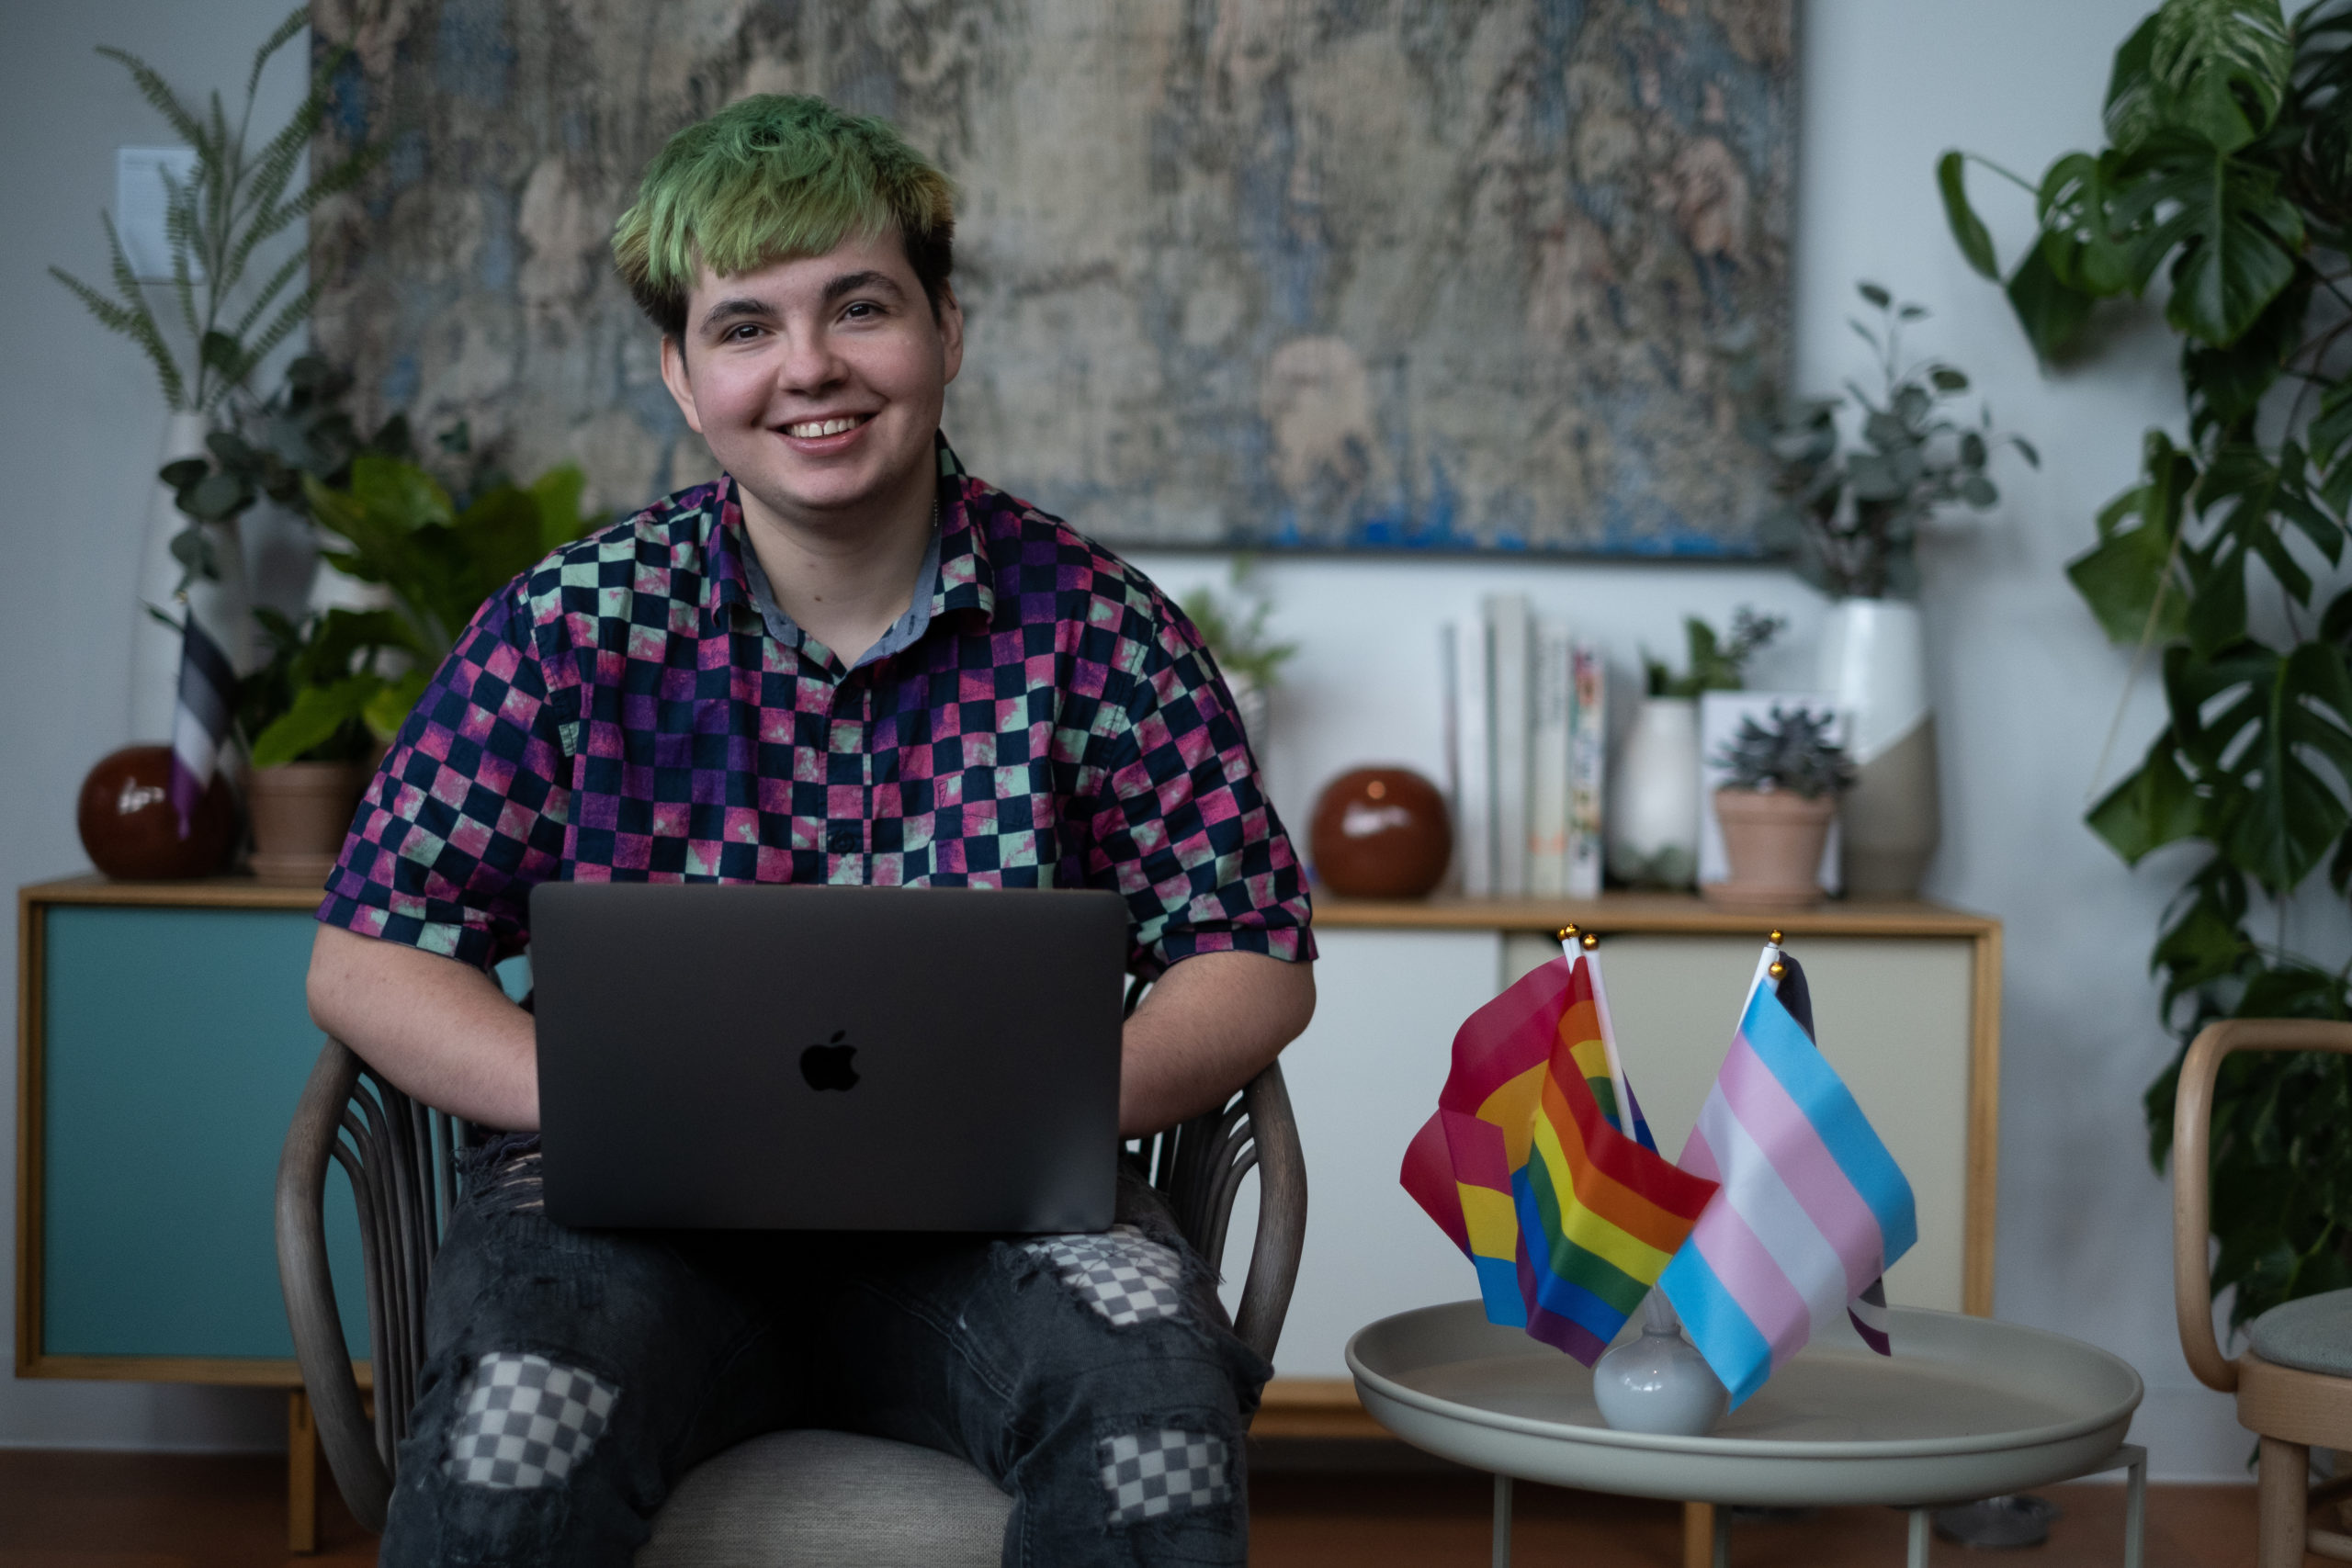 A Just Like Us volunteer sat with a laptop next to several LGBT+ Pride flags